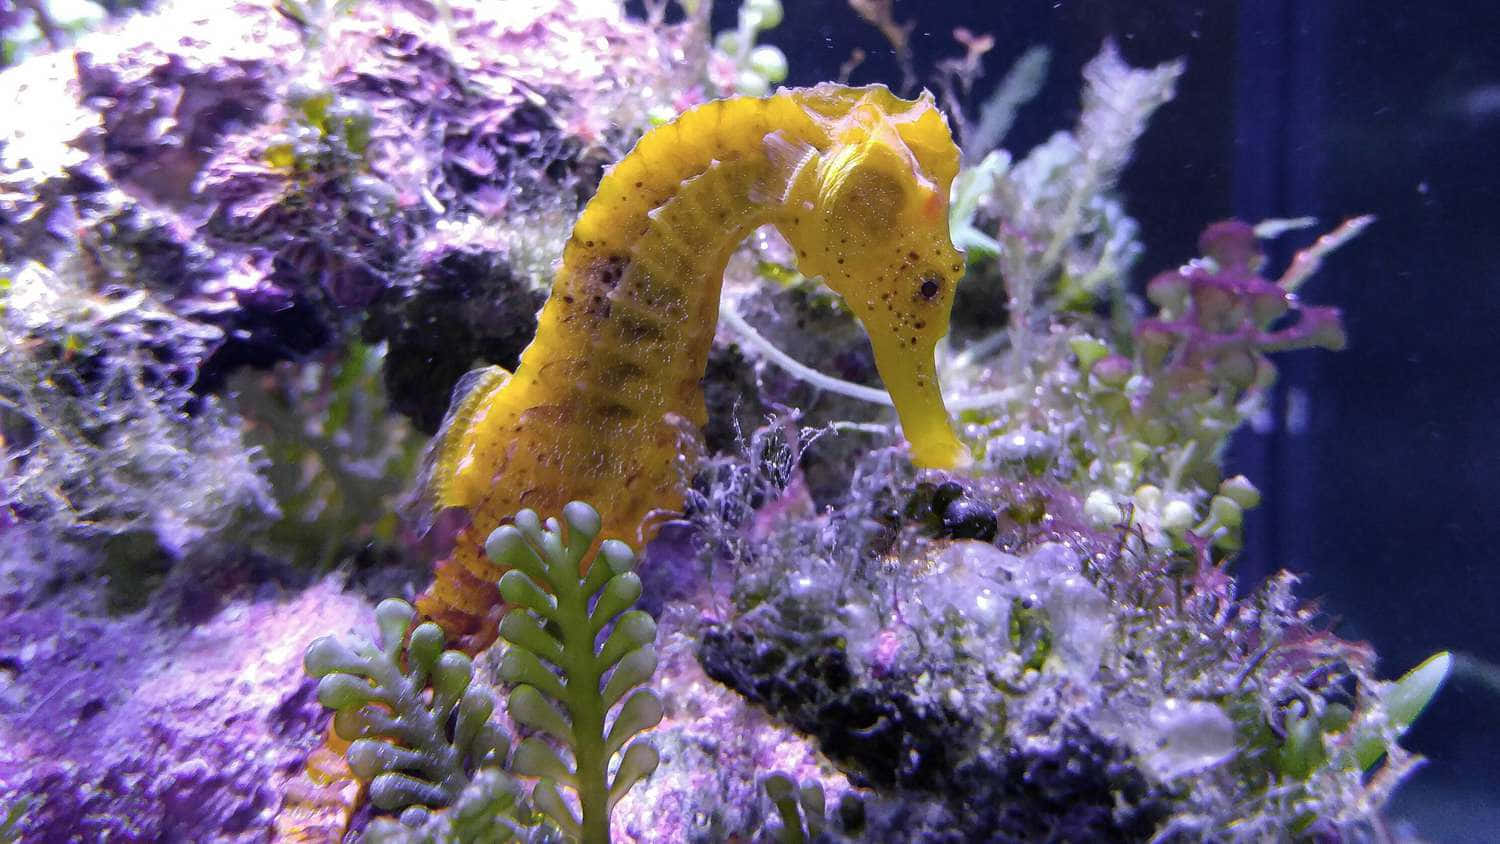 A small seahorse nestled among the colorful underwater coral